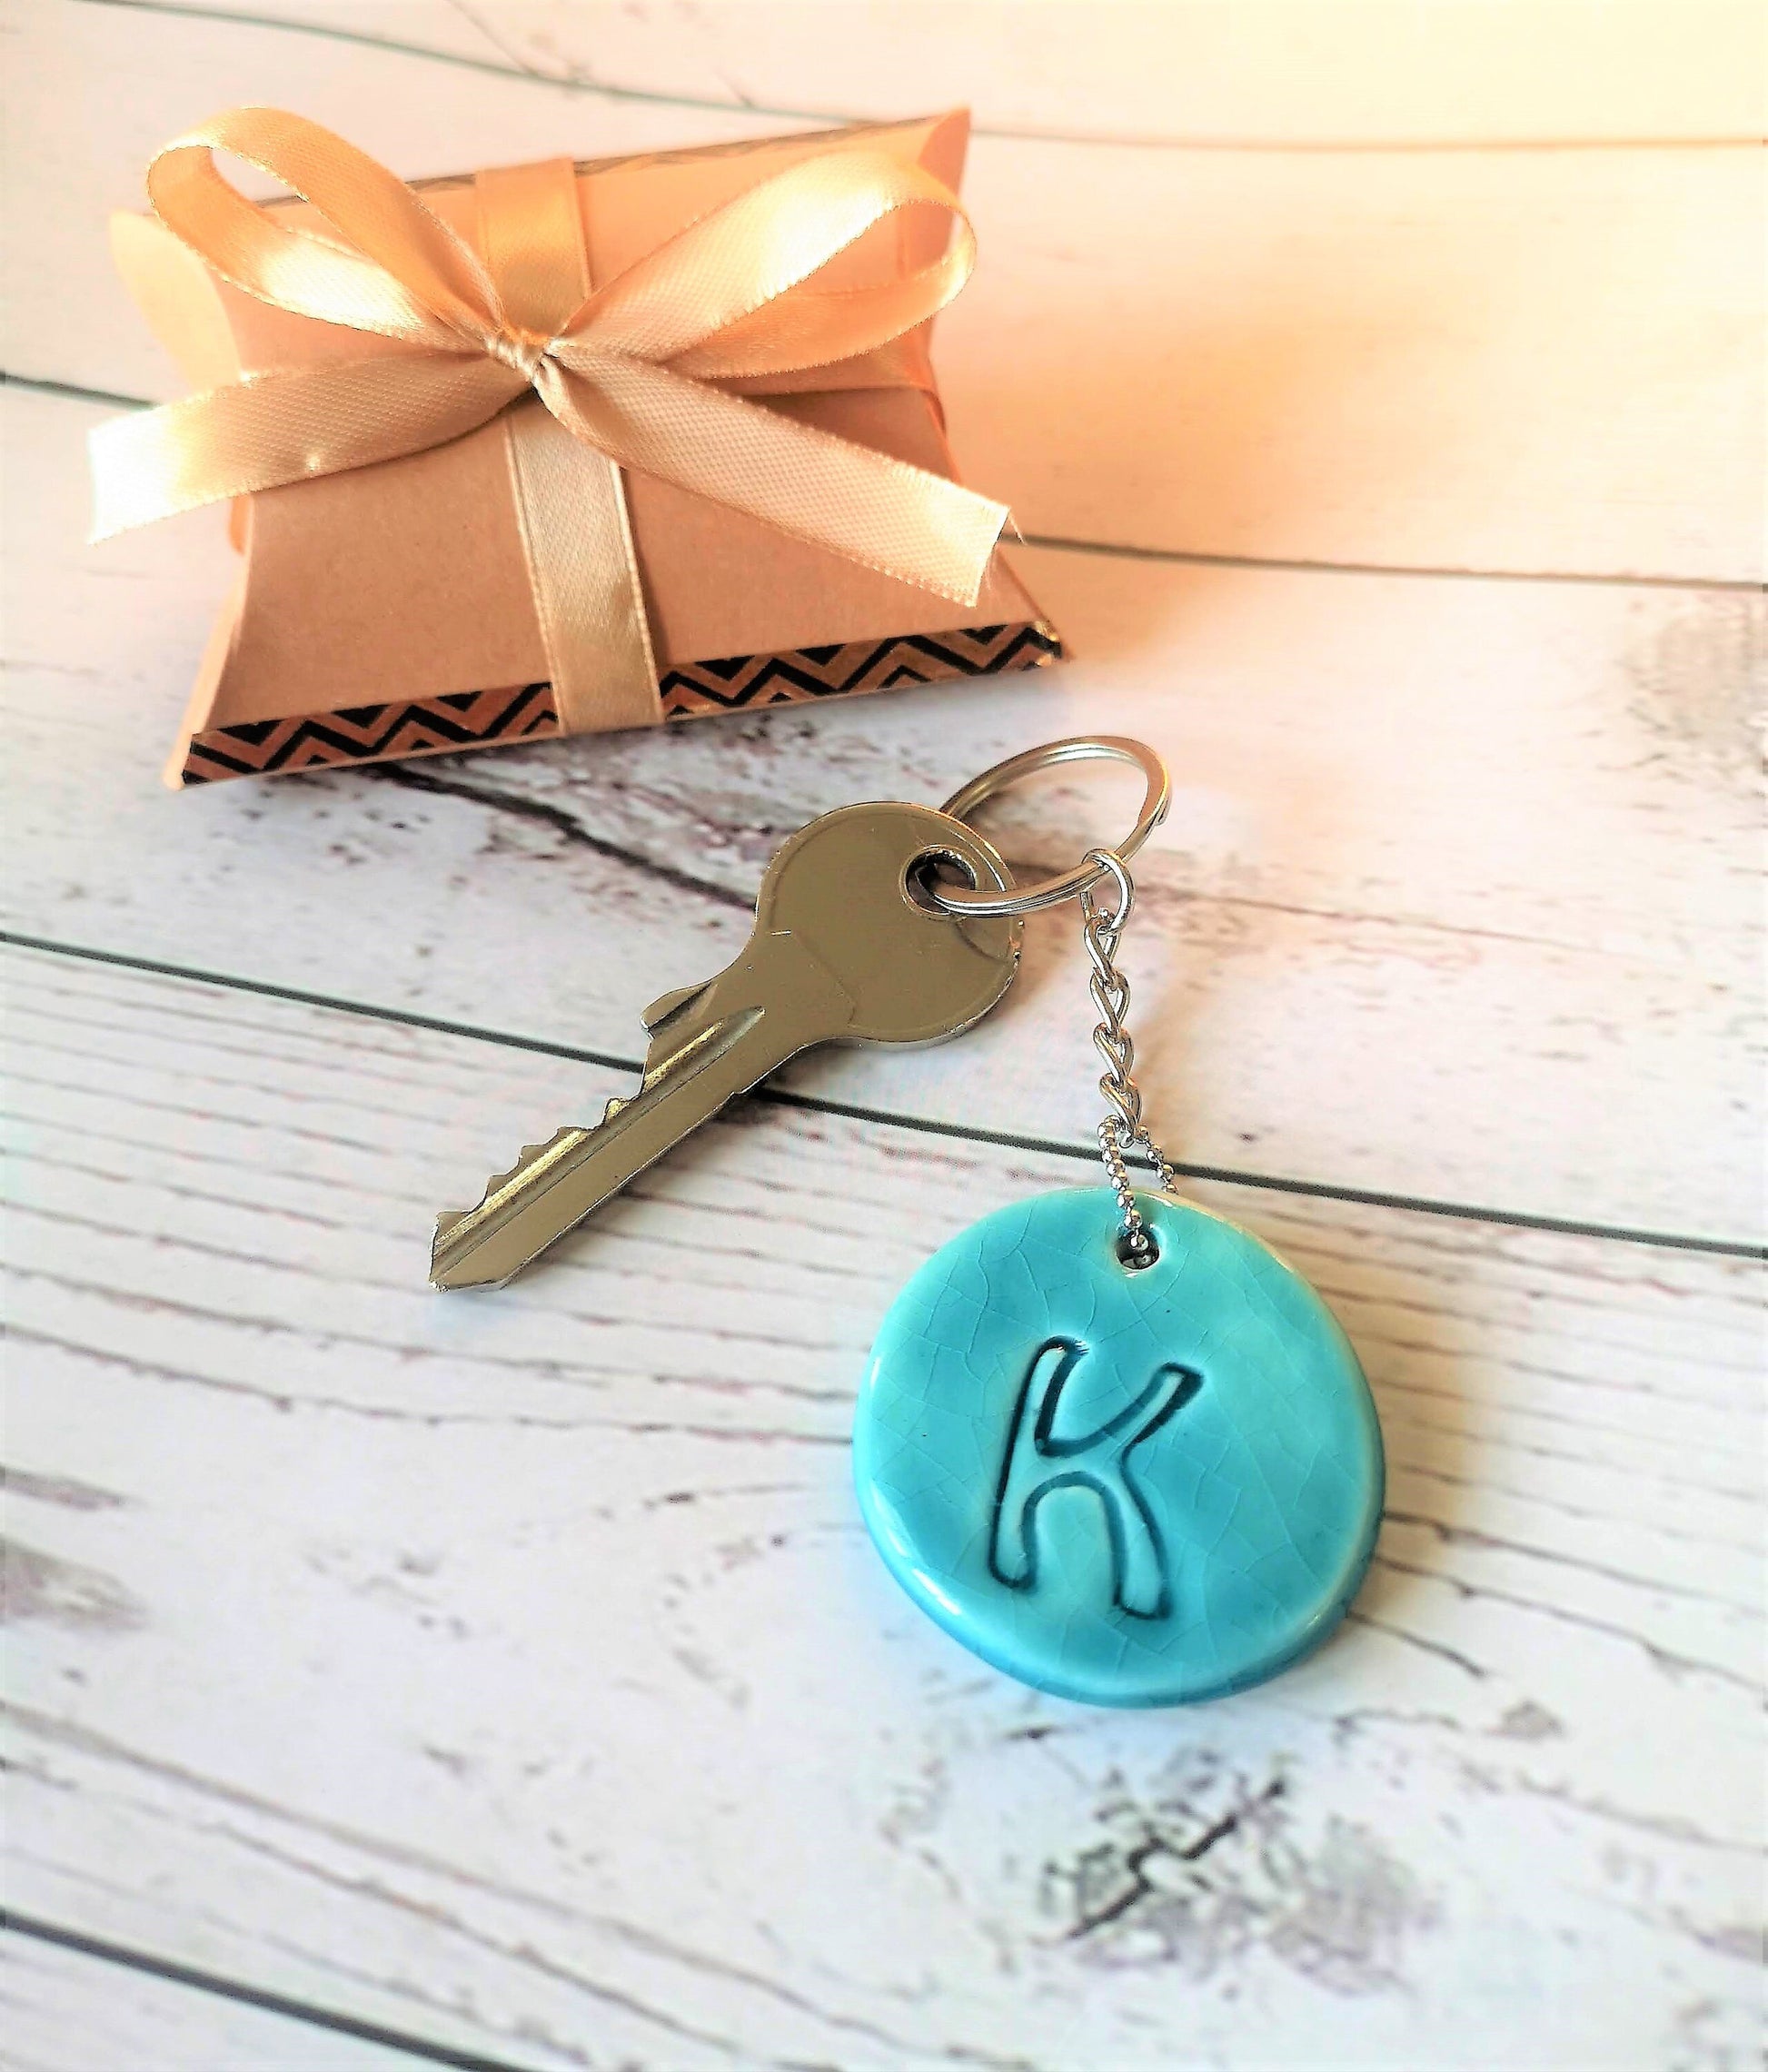 Blue Initial Keychain For Women, Letter Keychain Charm, Personalized Gifts For Her, Custom Handmade Ceramic Aesthetic keychain For Mom - Ceramica Ana Rafael